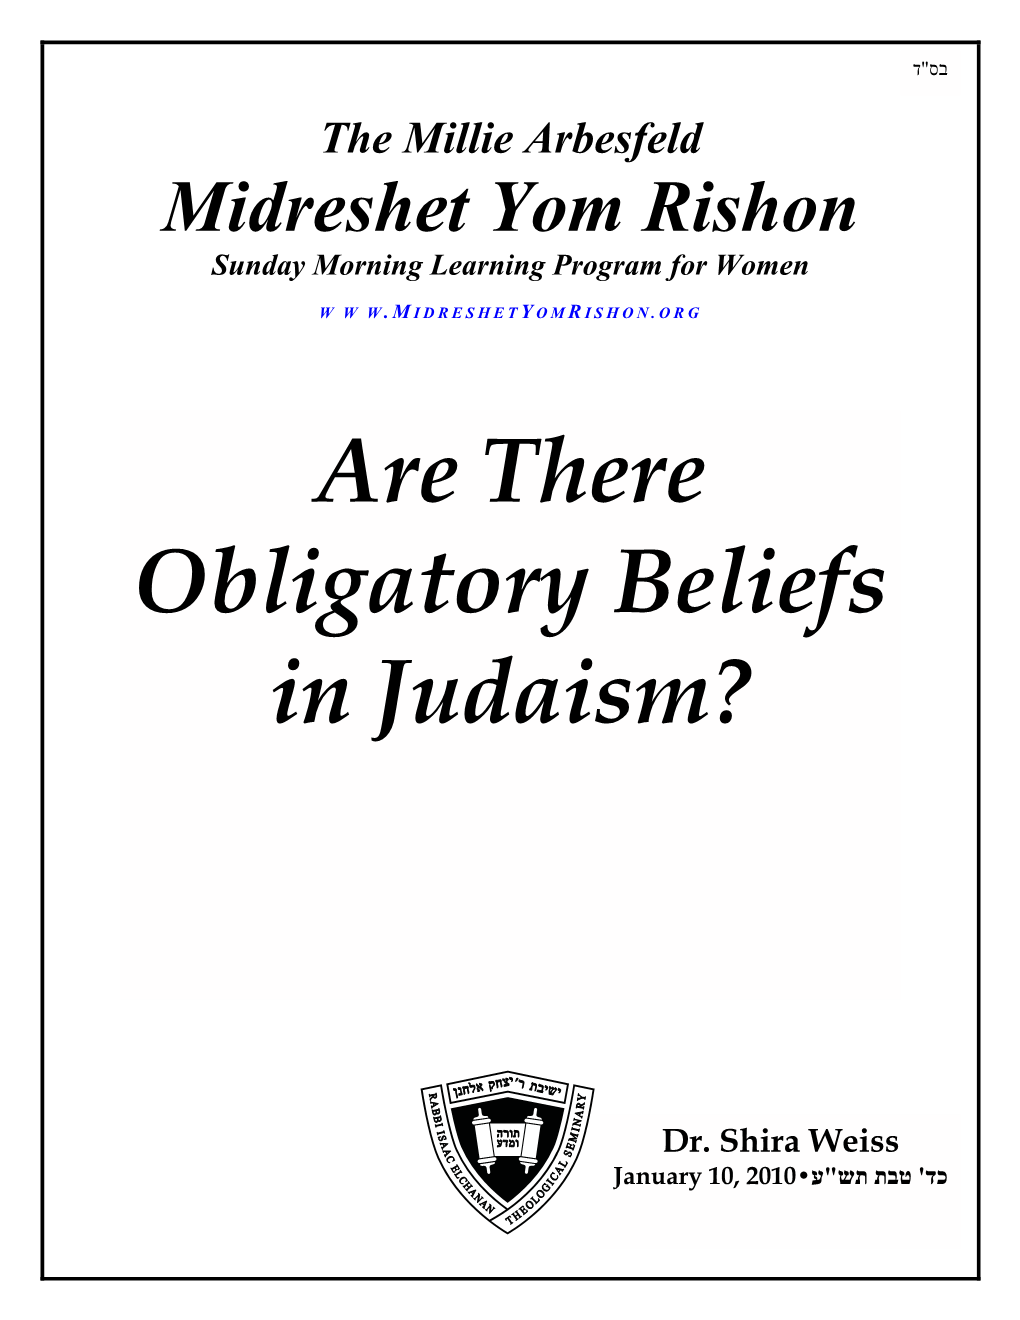 Are There Obligatory Beliefs in Judaism?